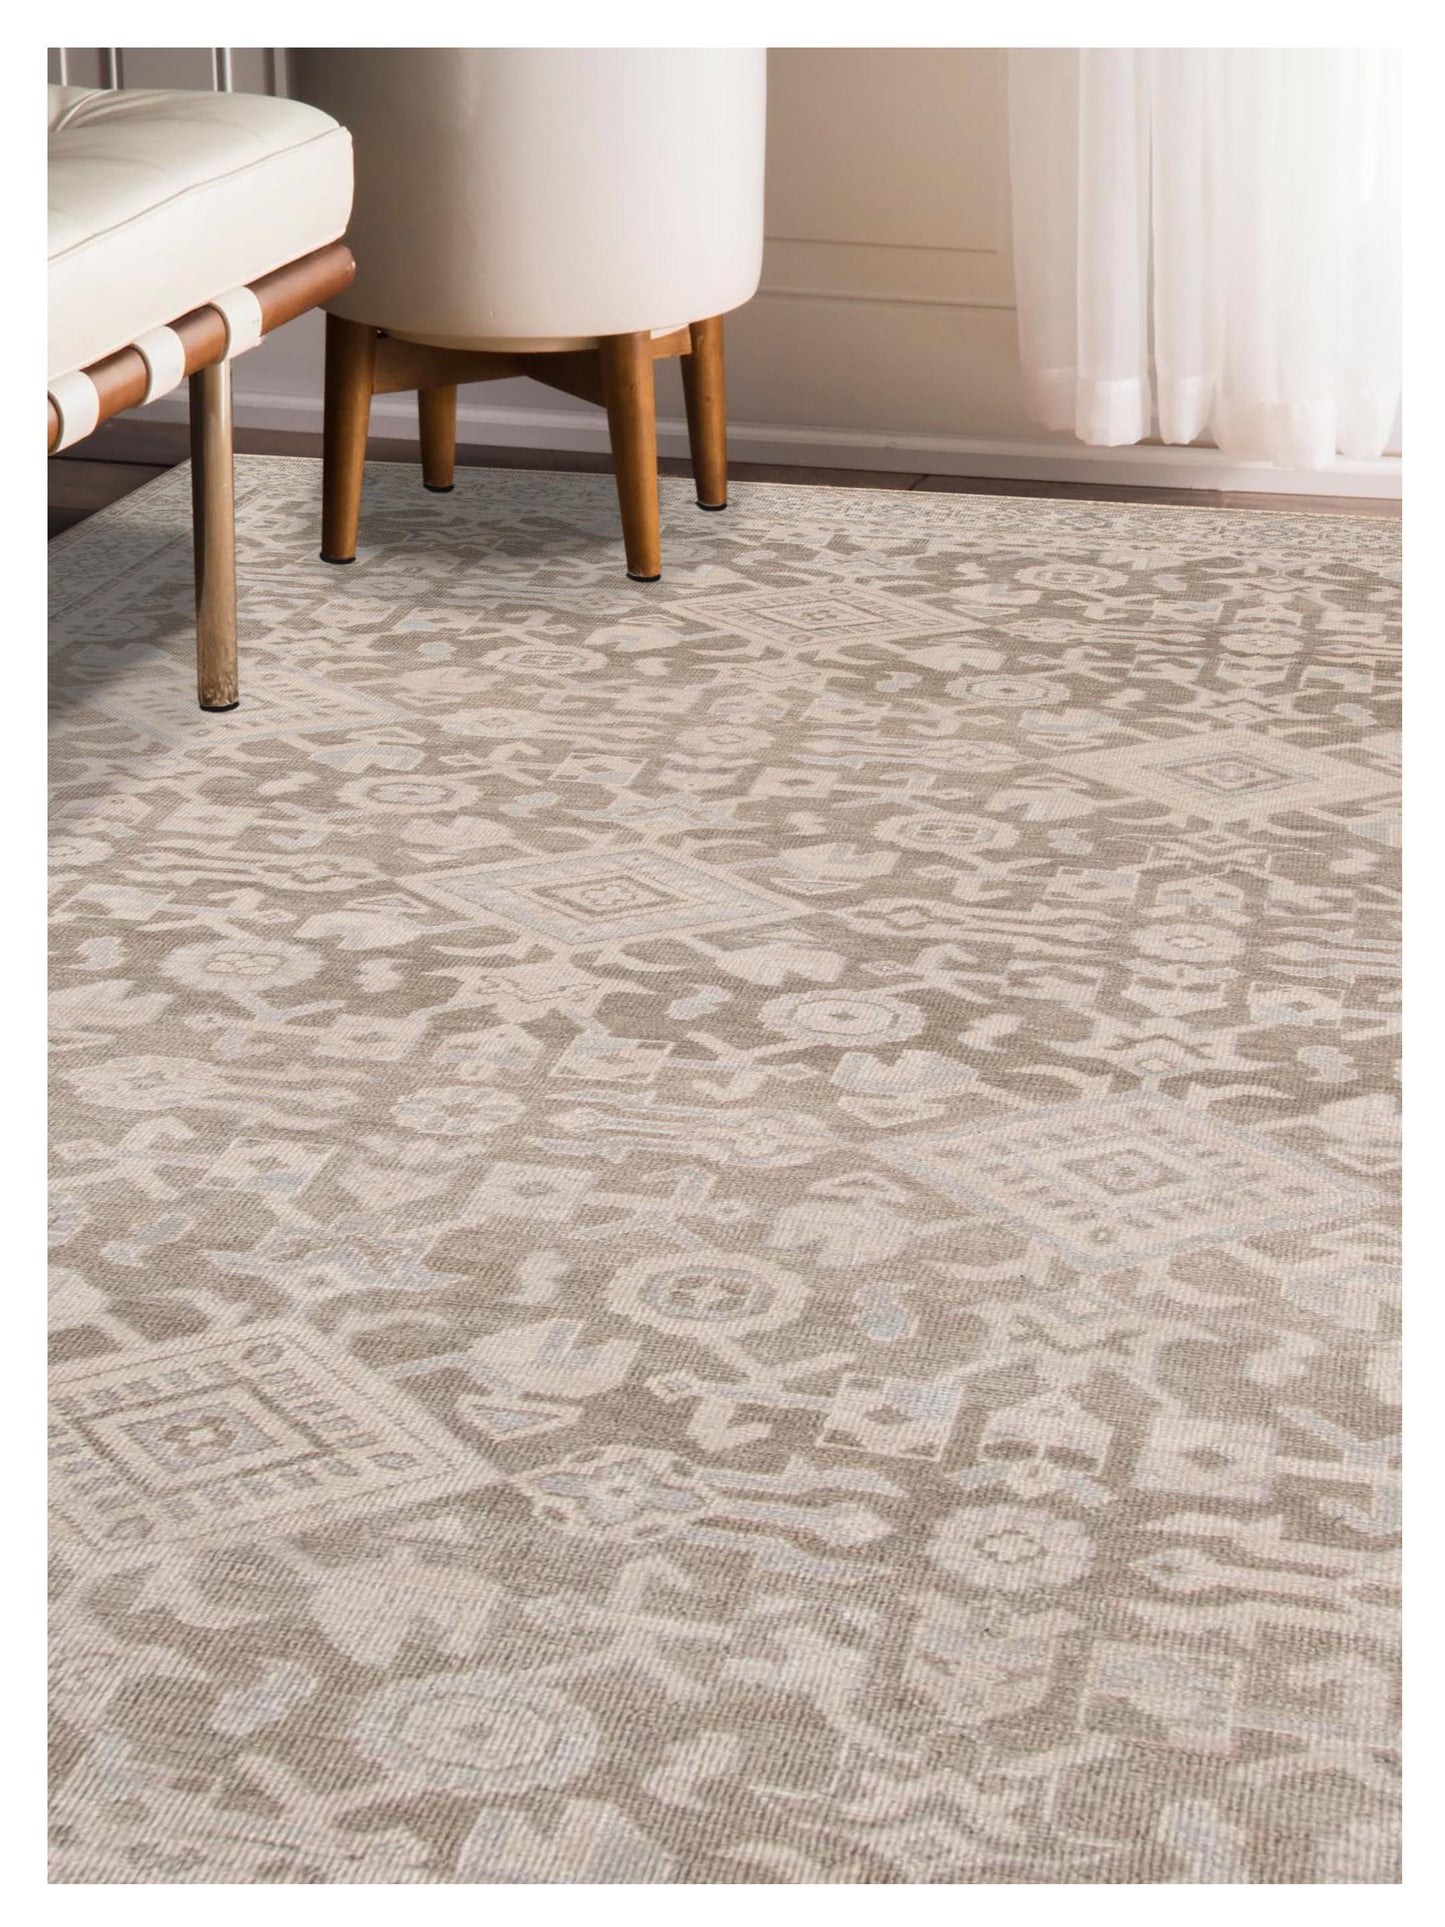 Limited ALBURY AL-351 SANTAS GRAY Traditional Knotted Rug